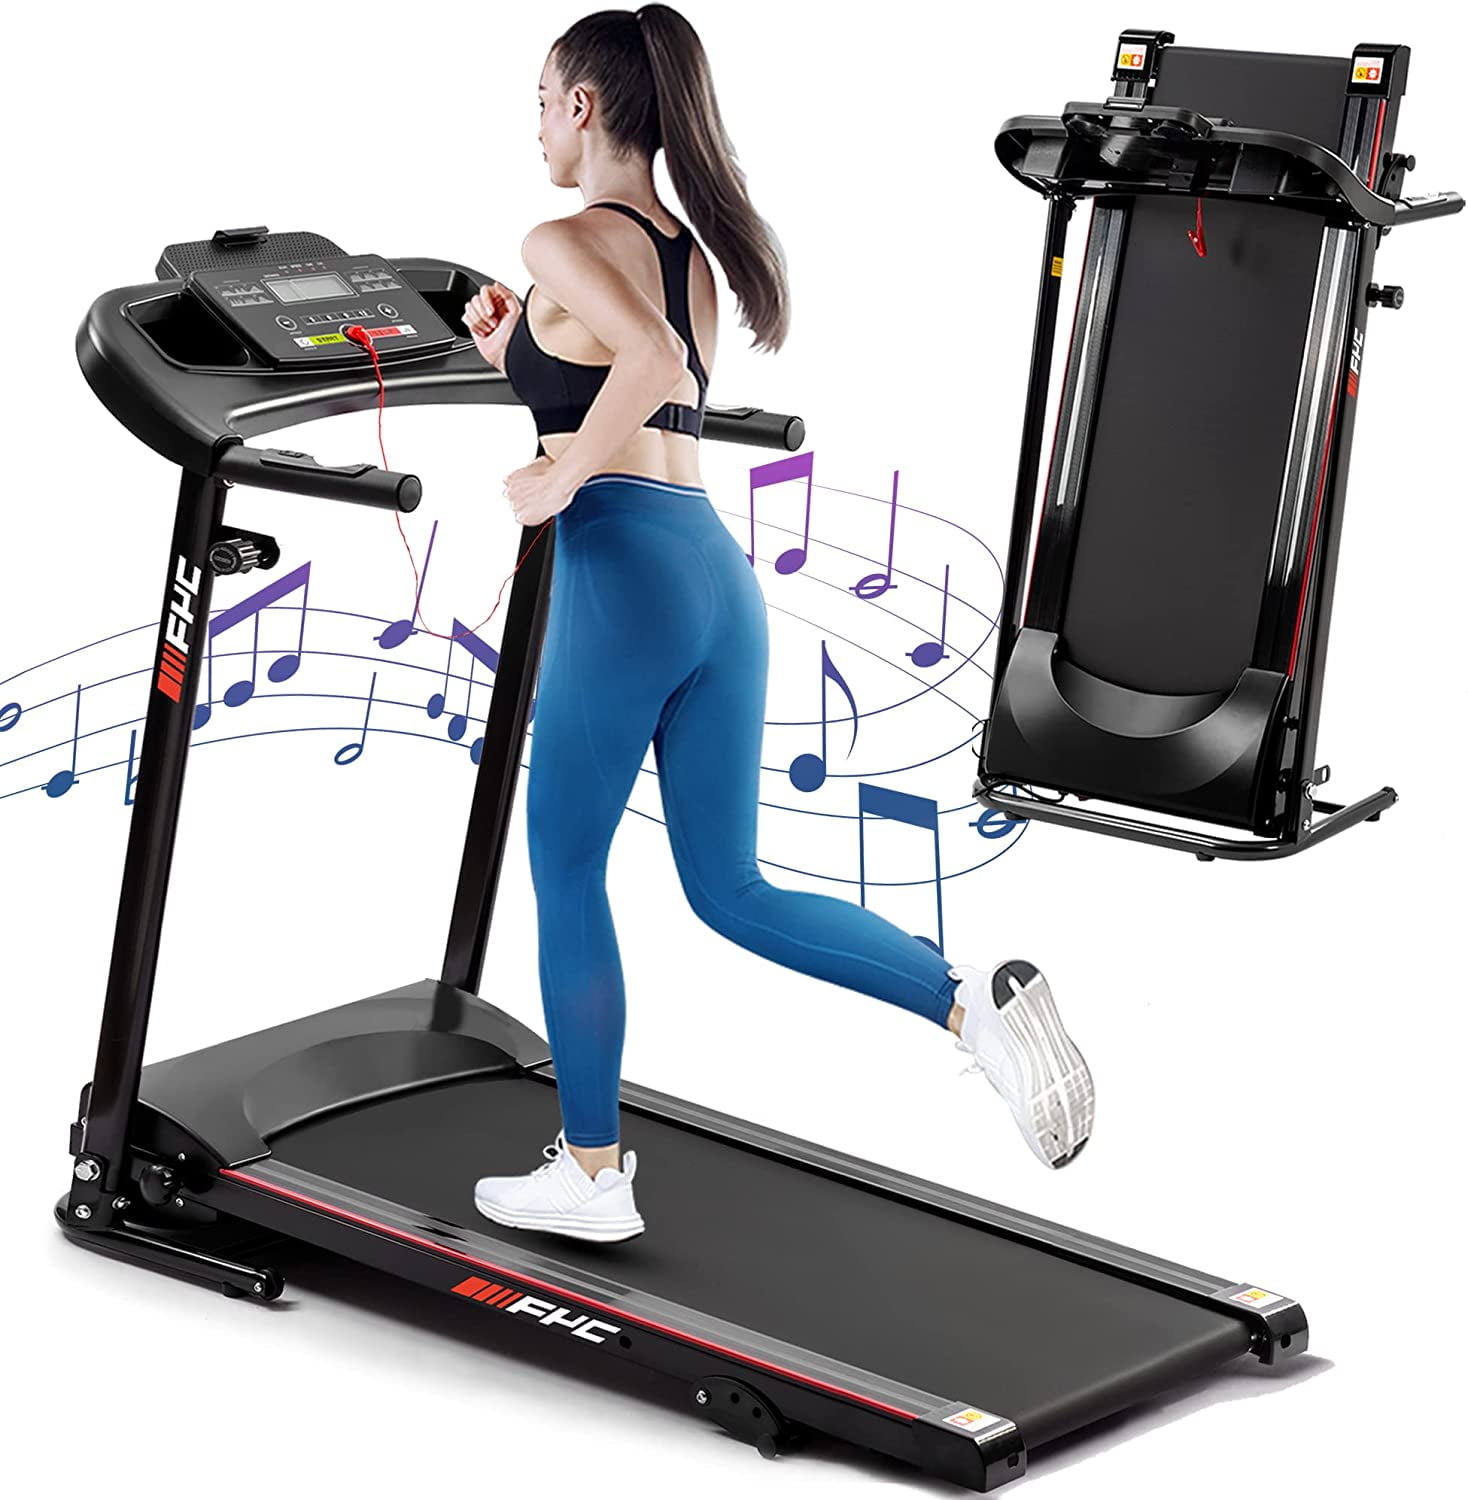 Ancheer Portable Electric Treadmill Folding Motorized Running Machine Home Gym 